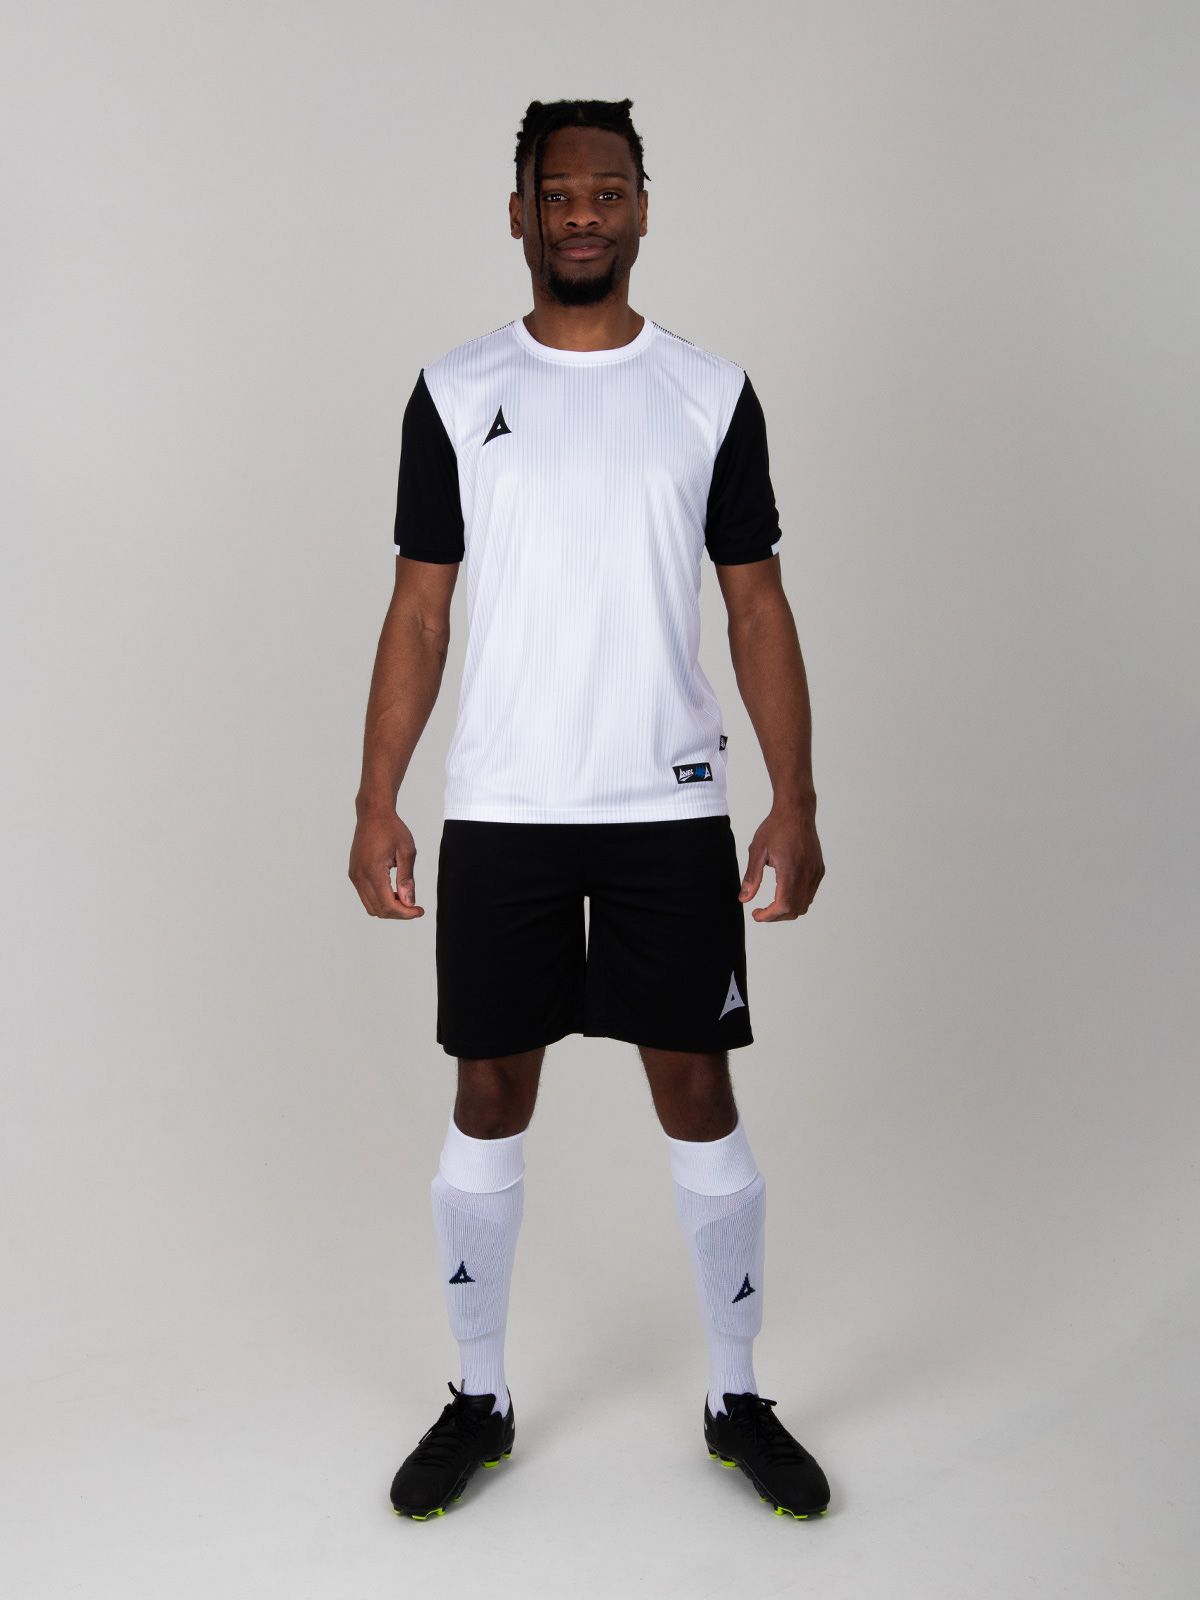 a football player is wearing a black and white football shirt, black shorts and white socks